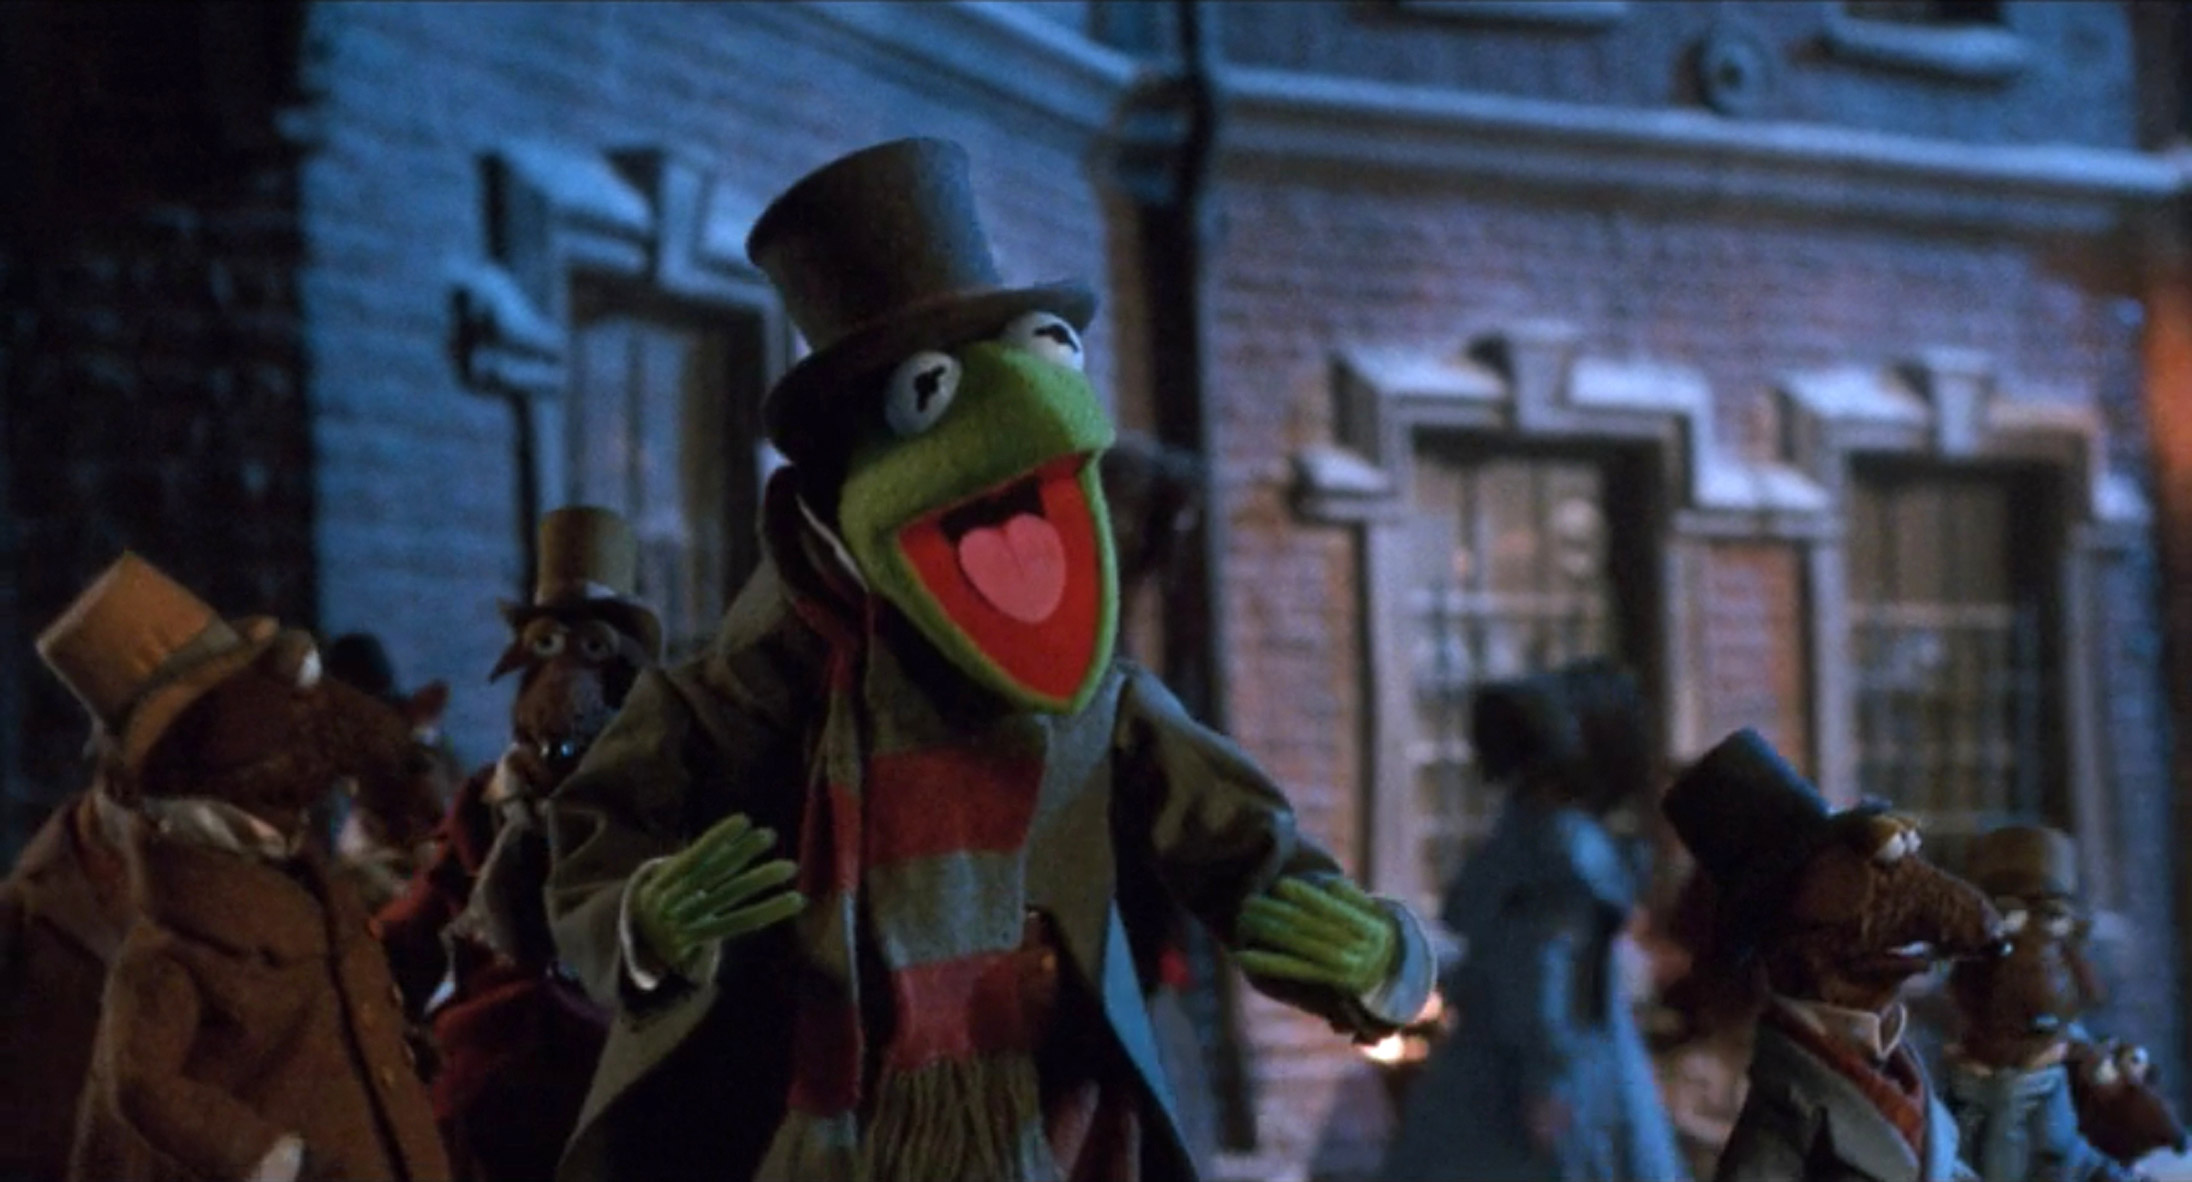 A scene from The Muppet Christmas Carol (1992)